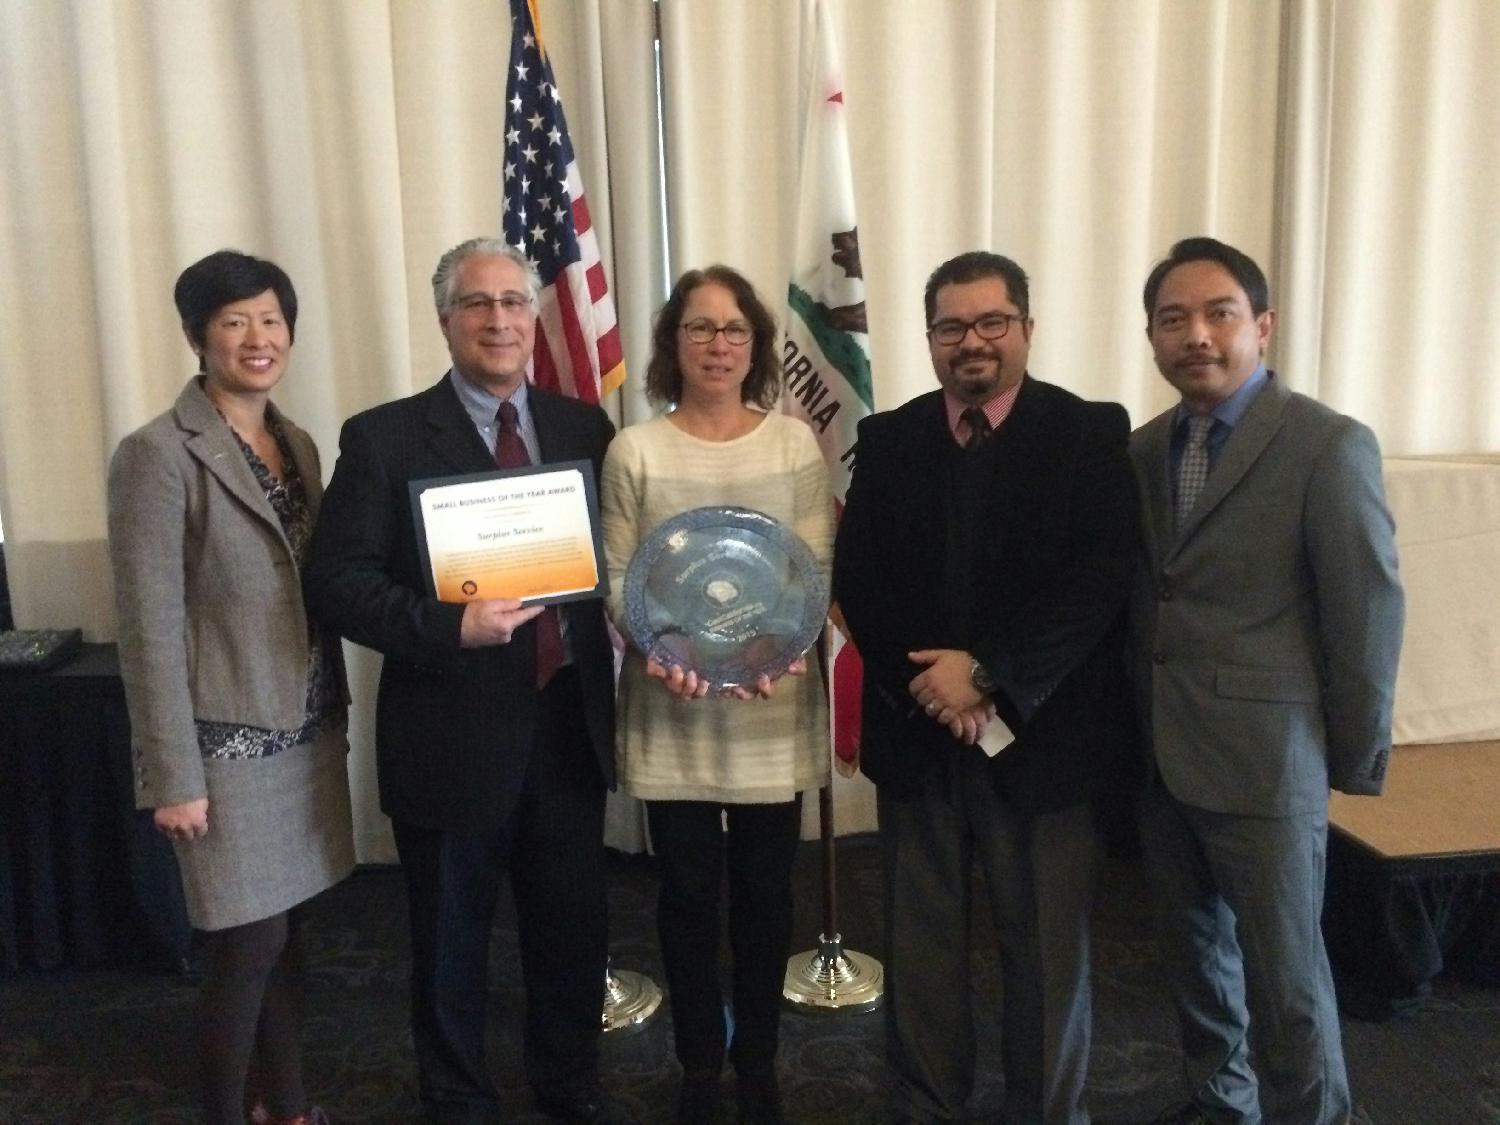 Ceremony for accepting the Governor’s Environmental and Economic Leadership Award, California’s highest sustainability award